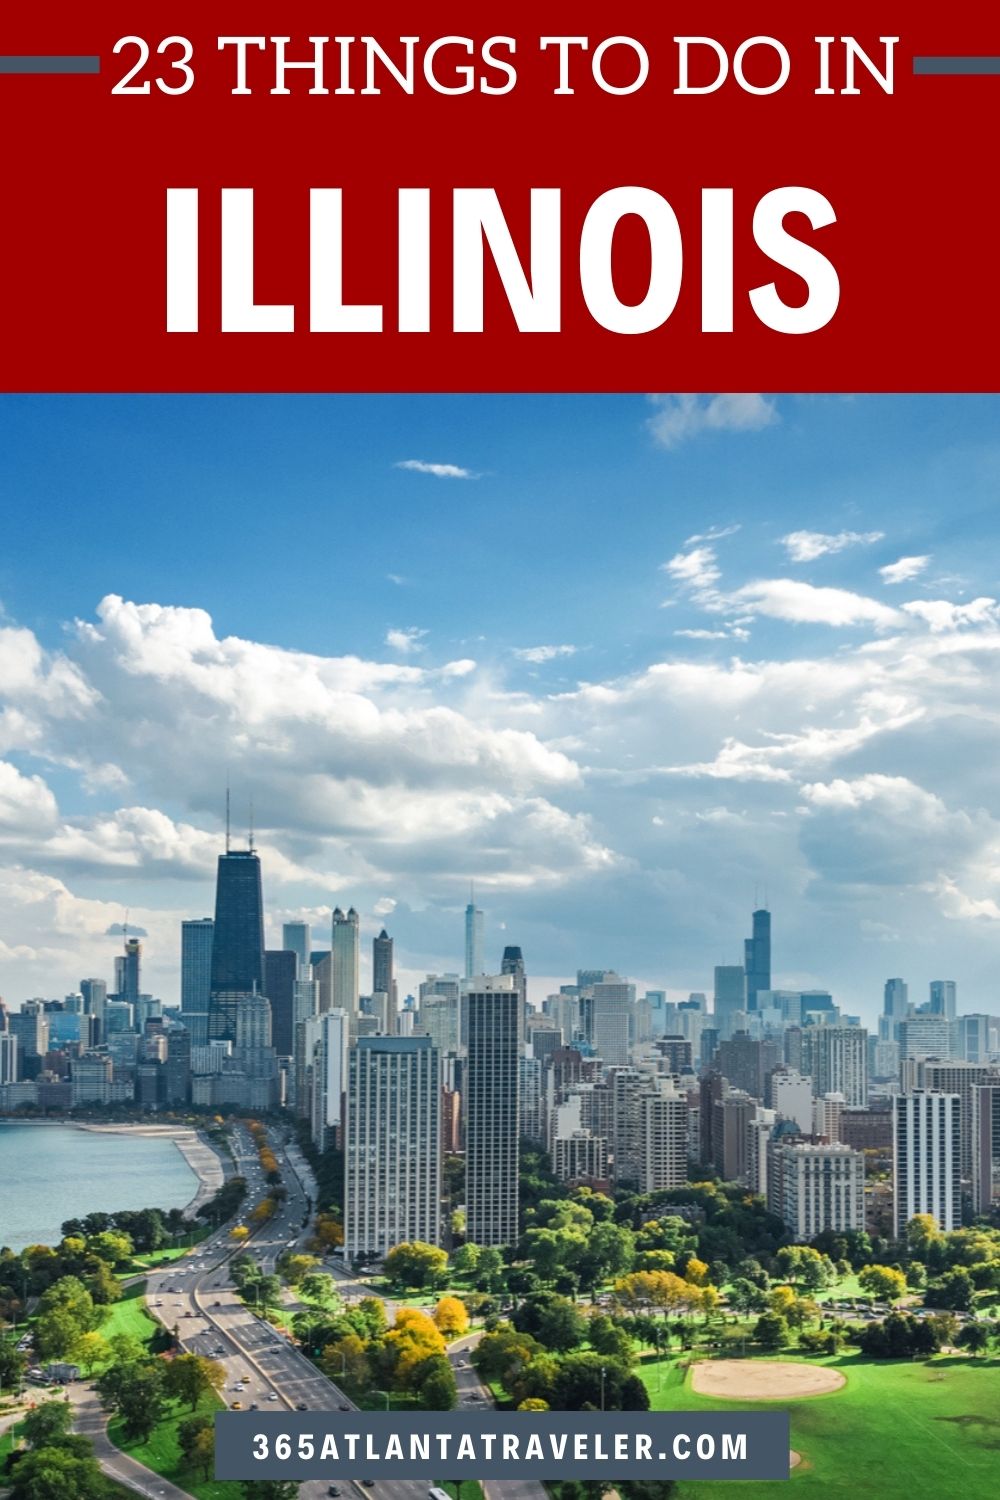 23 BEST THINGS TO DO IN ILLINOIS YOU CAN'T MISS